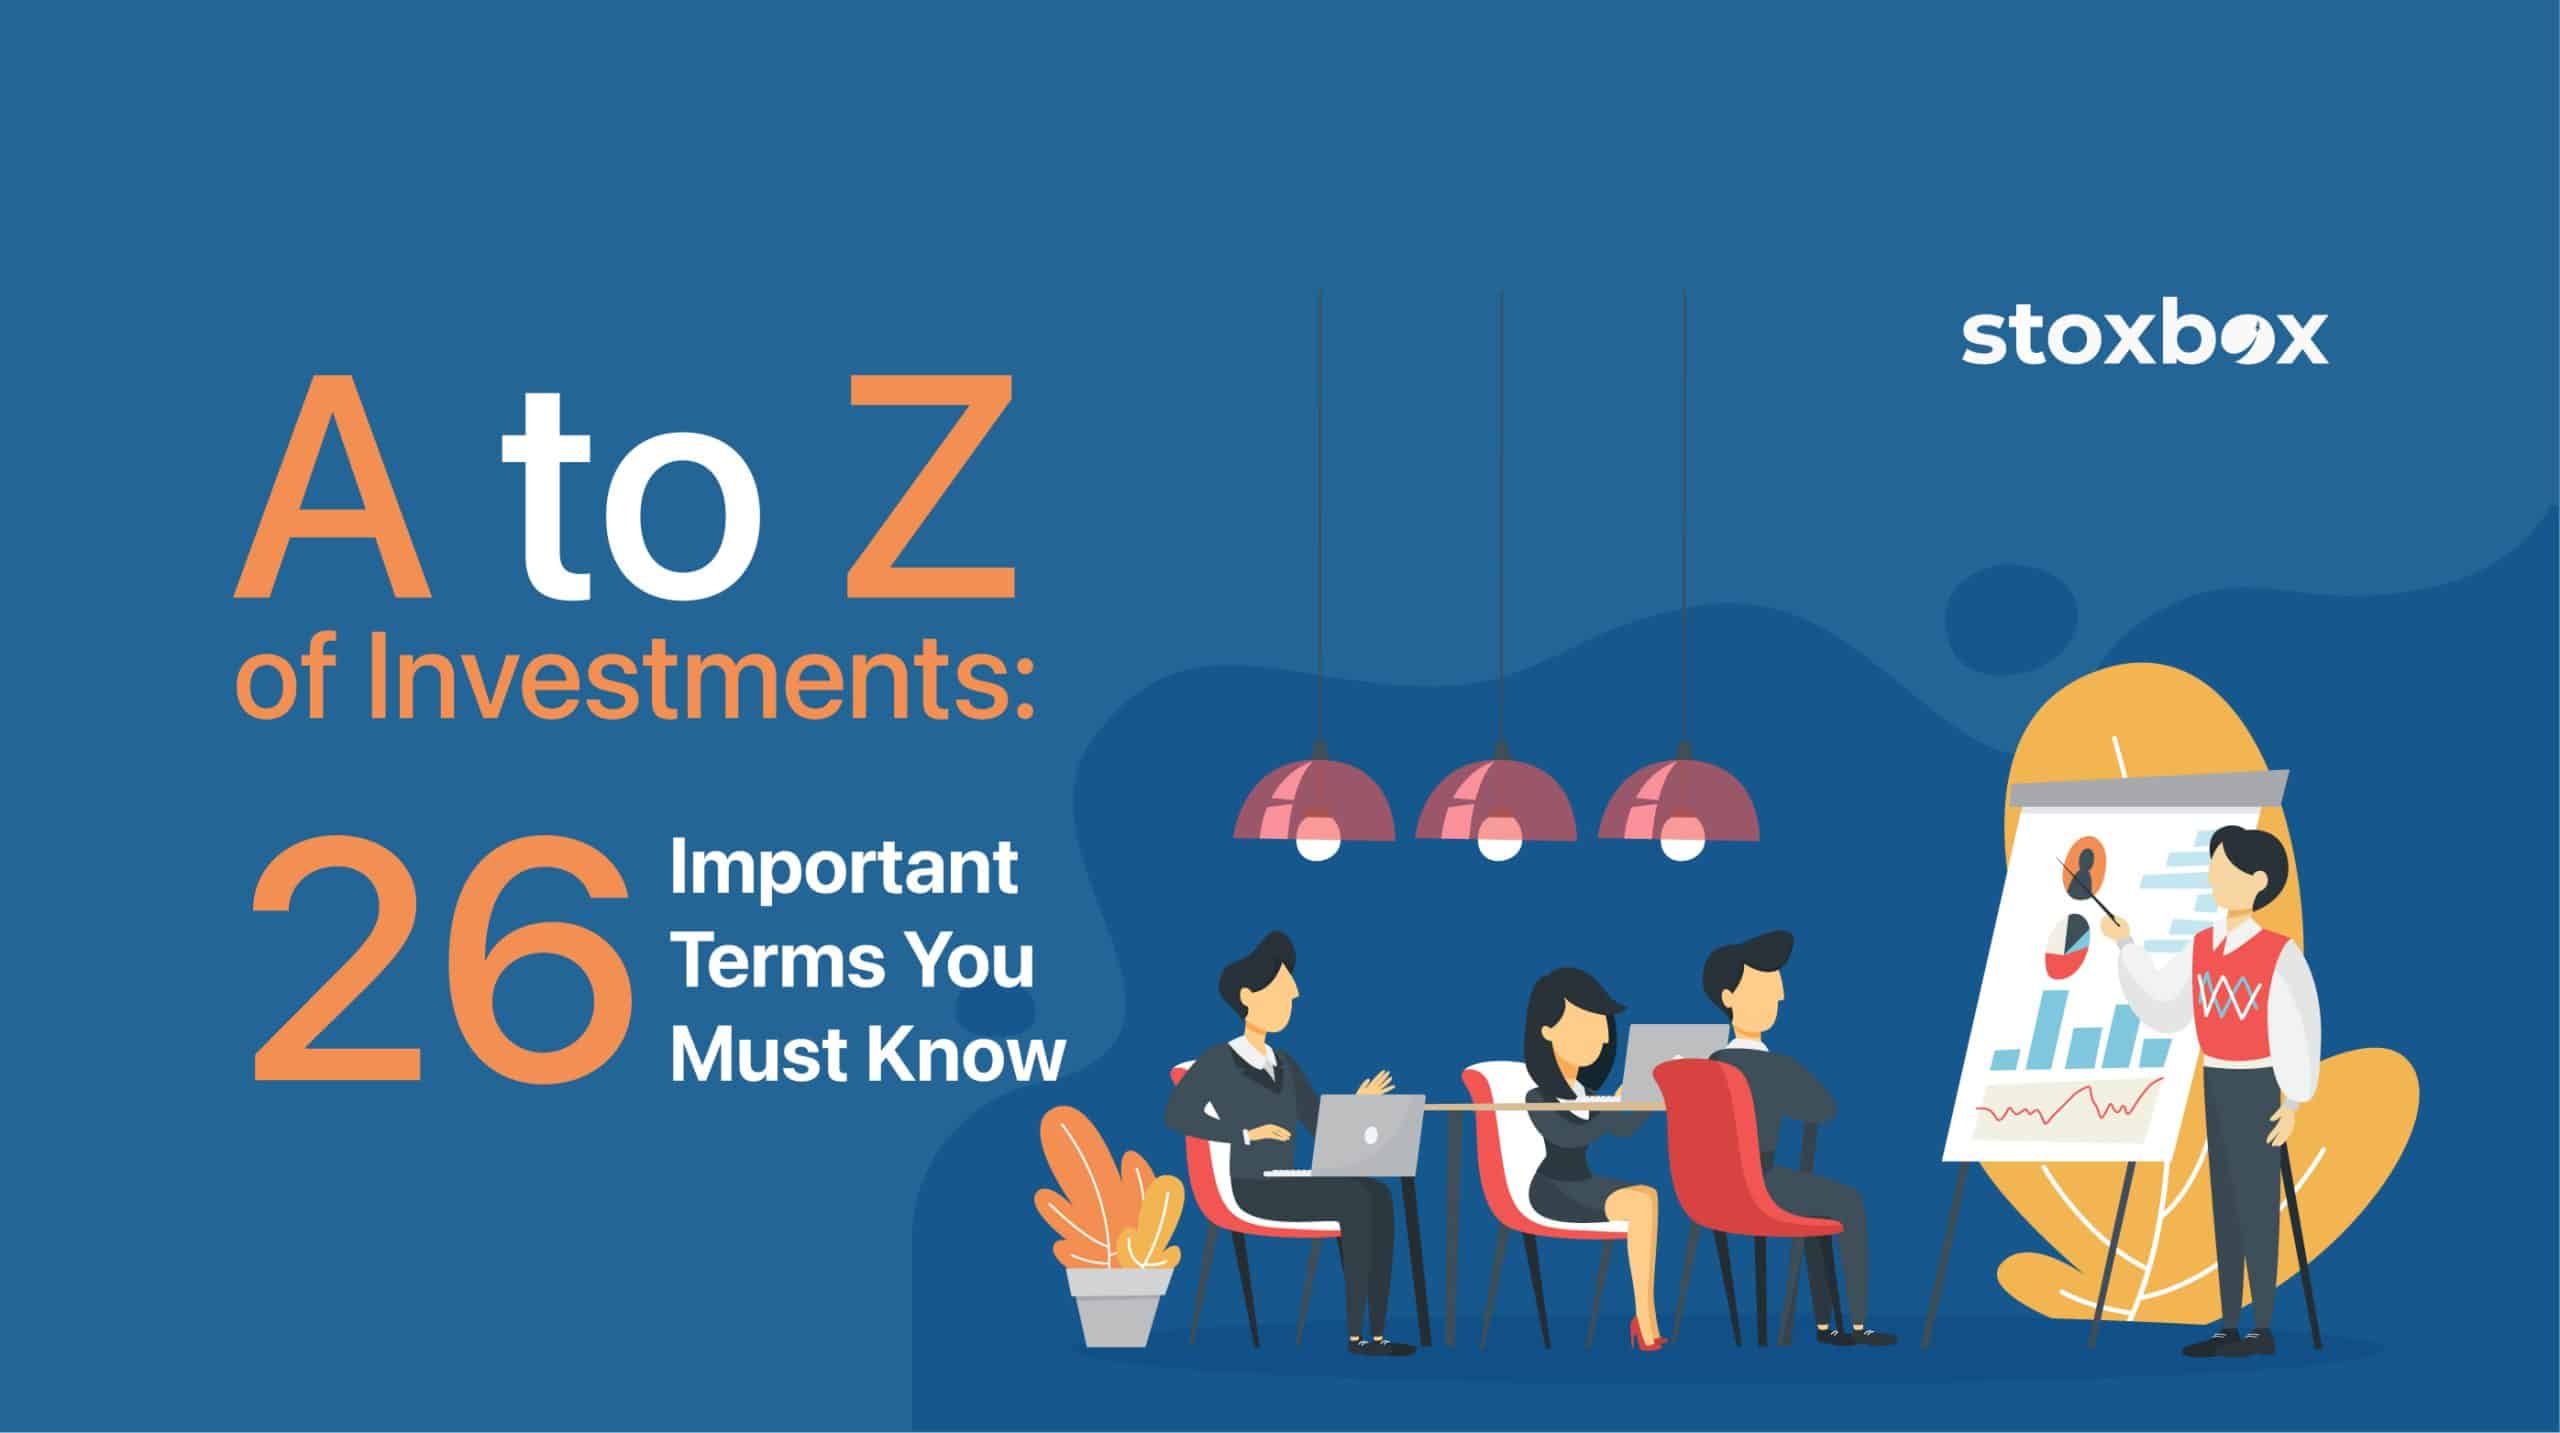 A to Z of Investments 26 Important Terms You Must Know